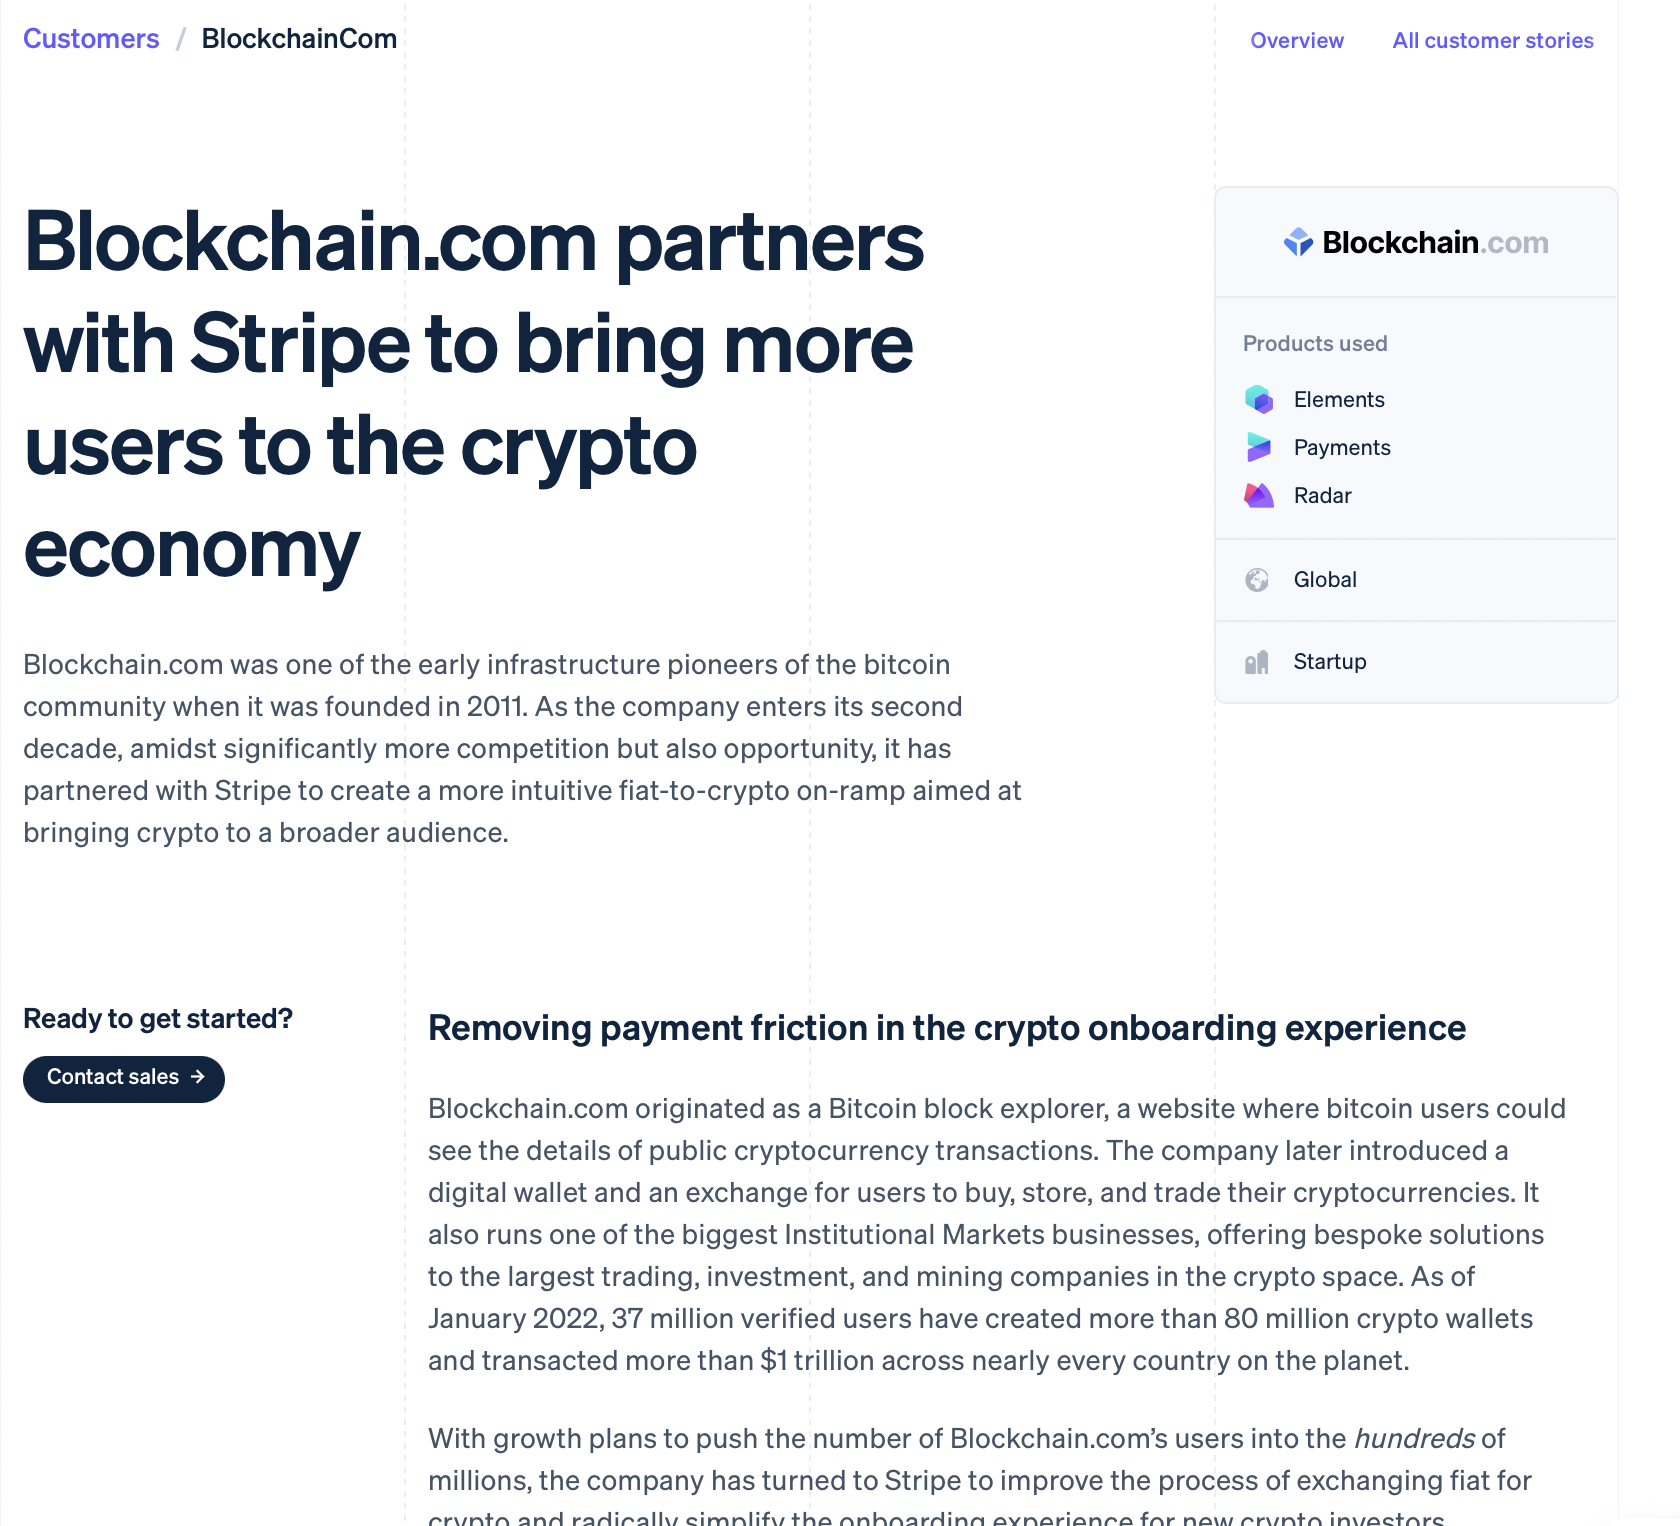 Stripe-Blockchain case study example - removing payment friction